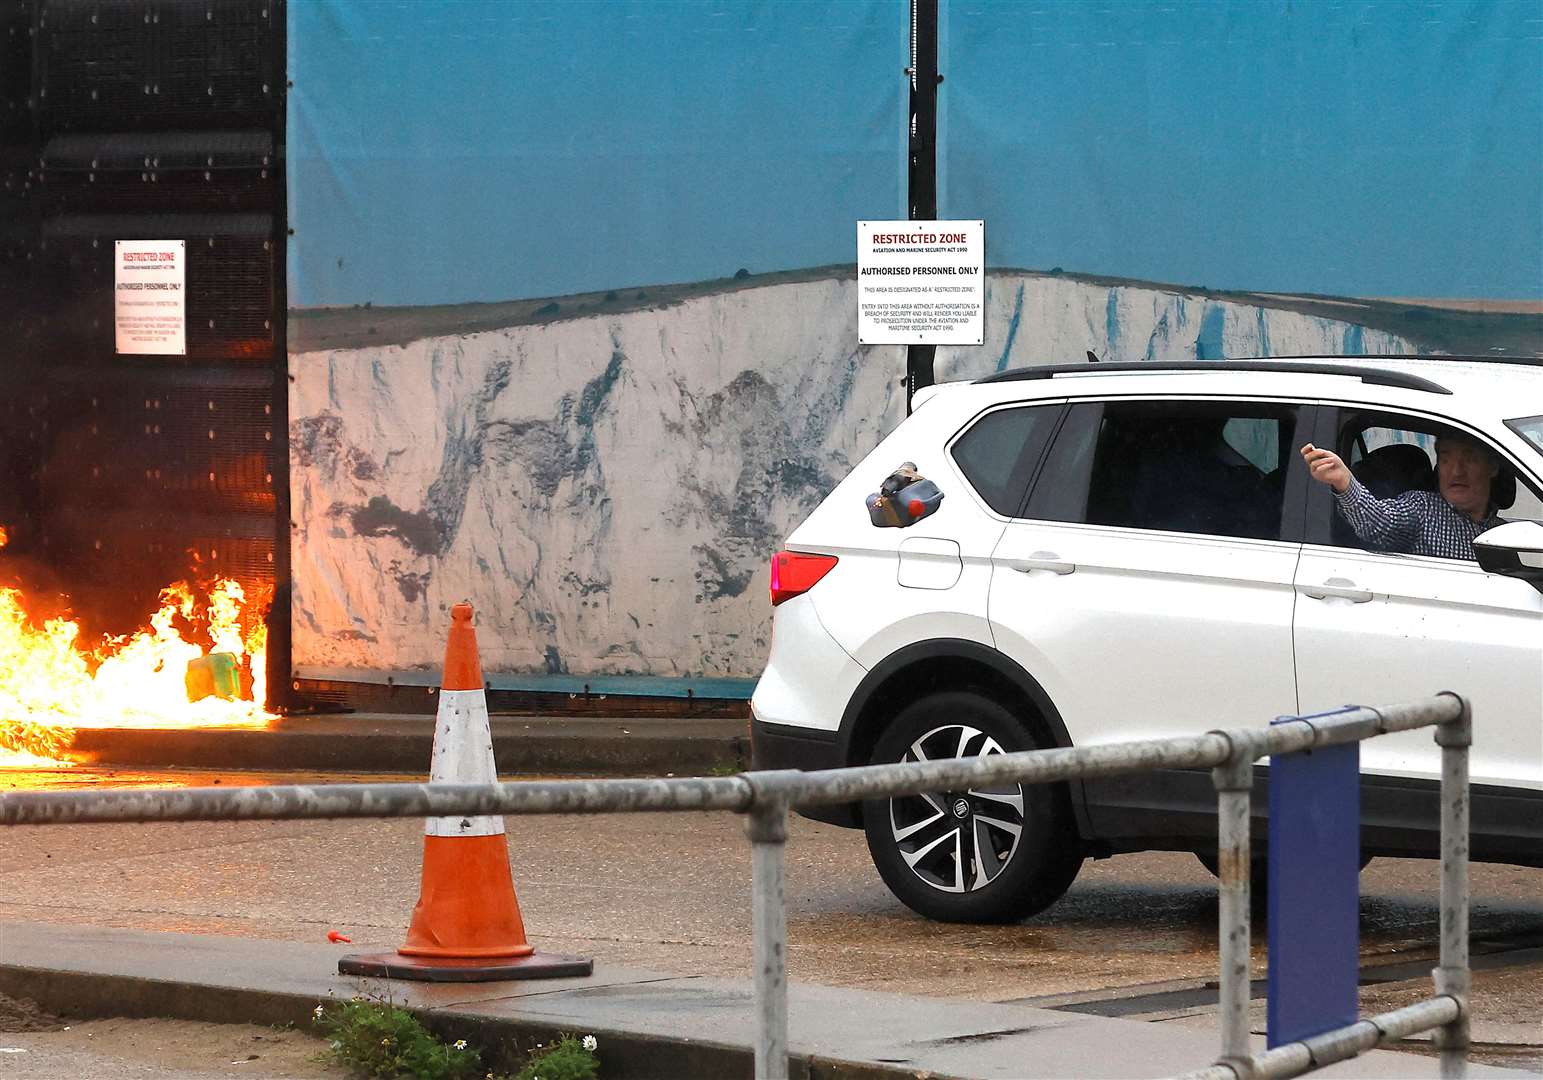 The suspect throws a petrol bomb at Tug Haven Picture: Reuters/Peter Nicholls